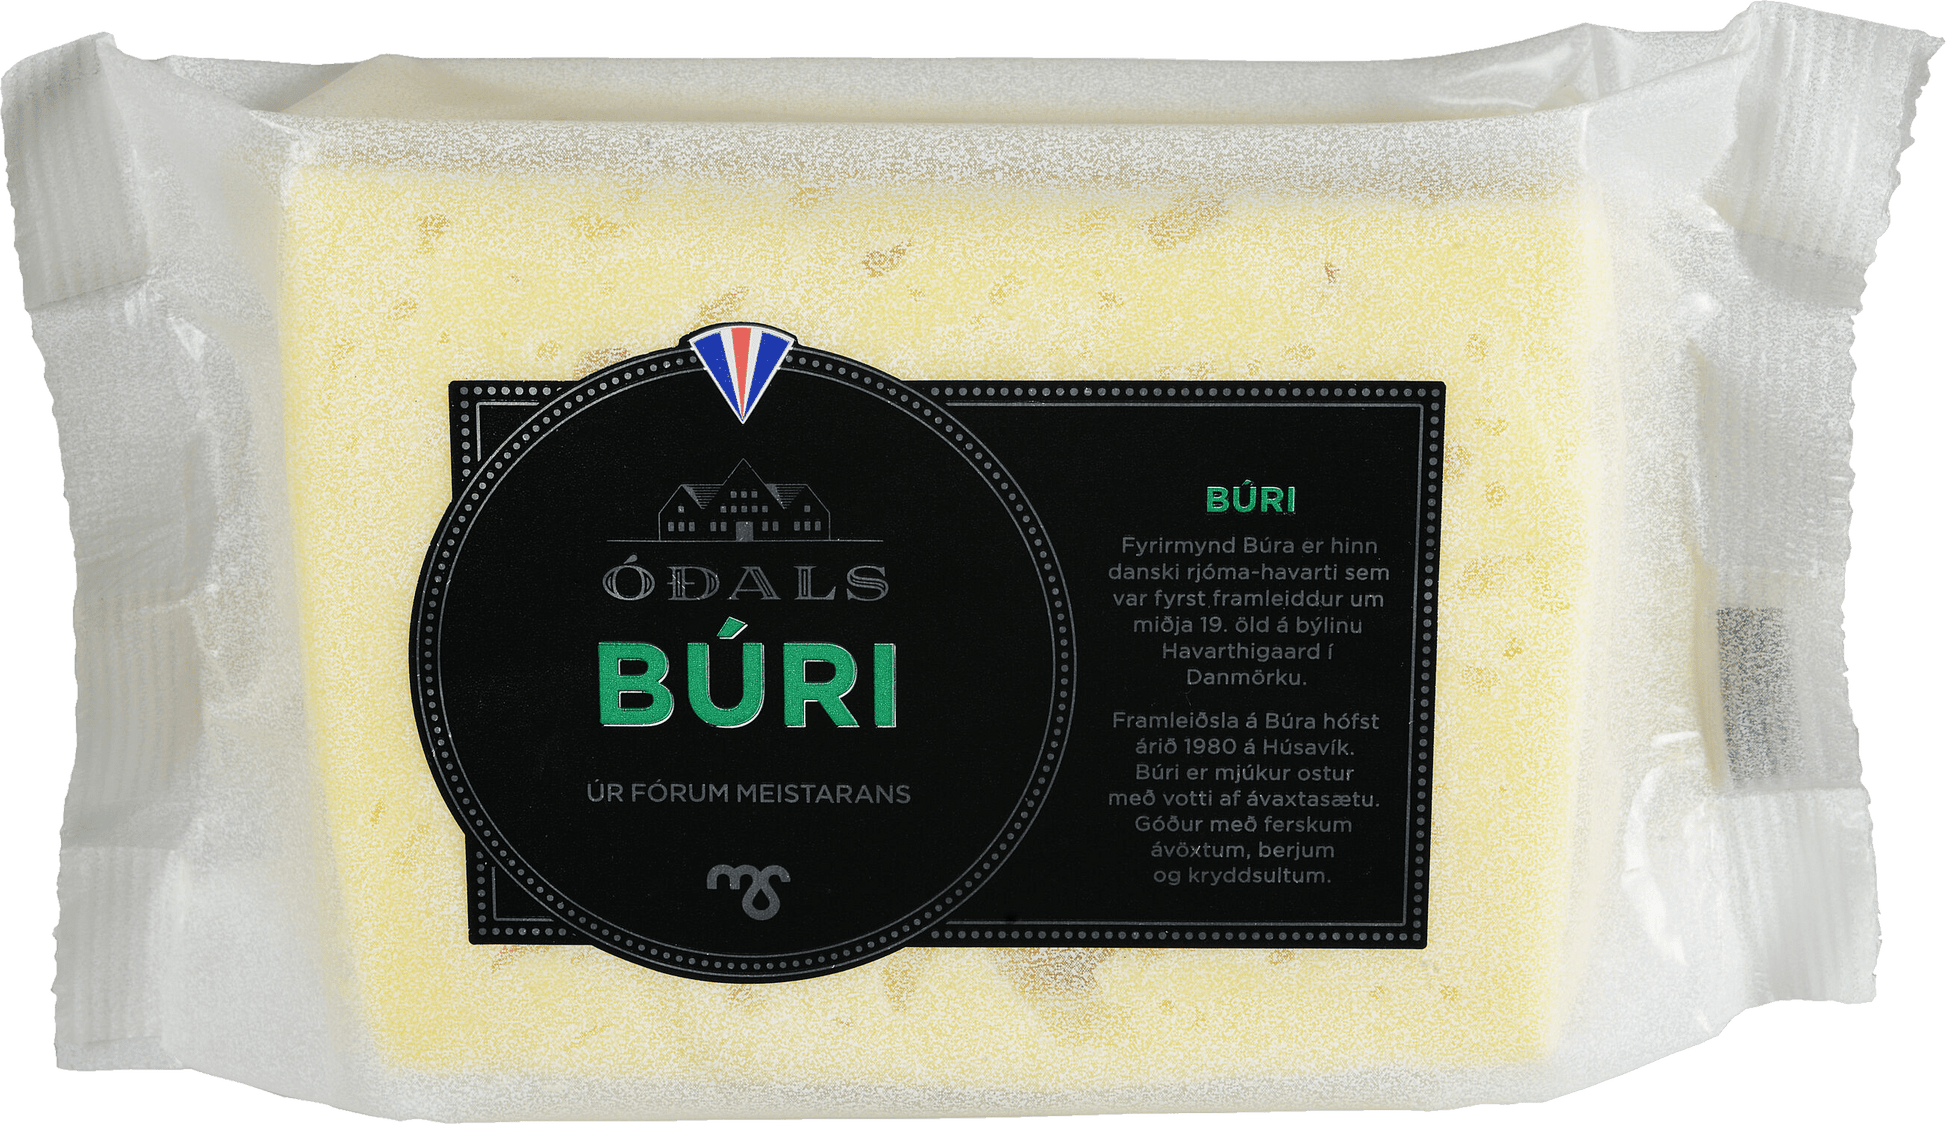 Oðals-Búri. The model for Búri is the Danish cream havarti, which was first produced in the mid-19th century at the Havarthigaard farm in Denmark.